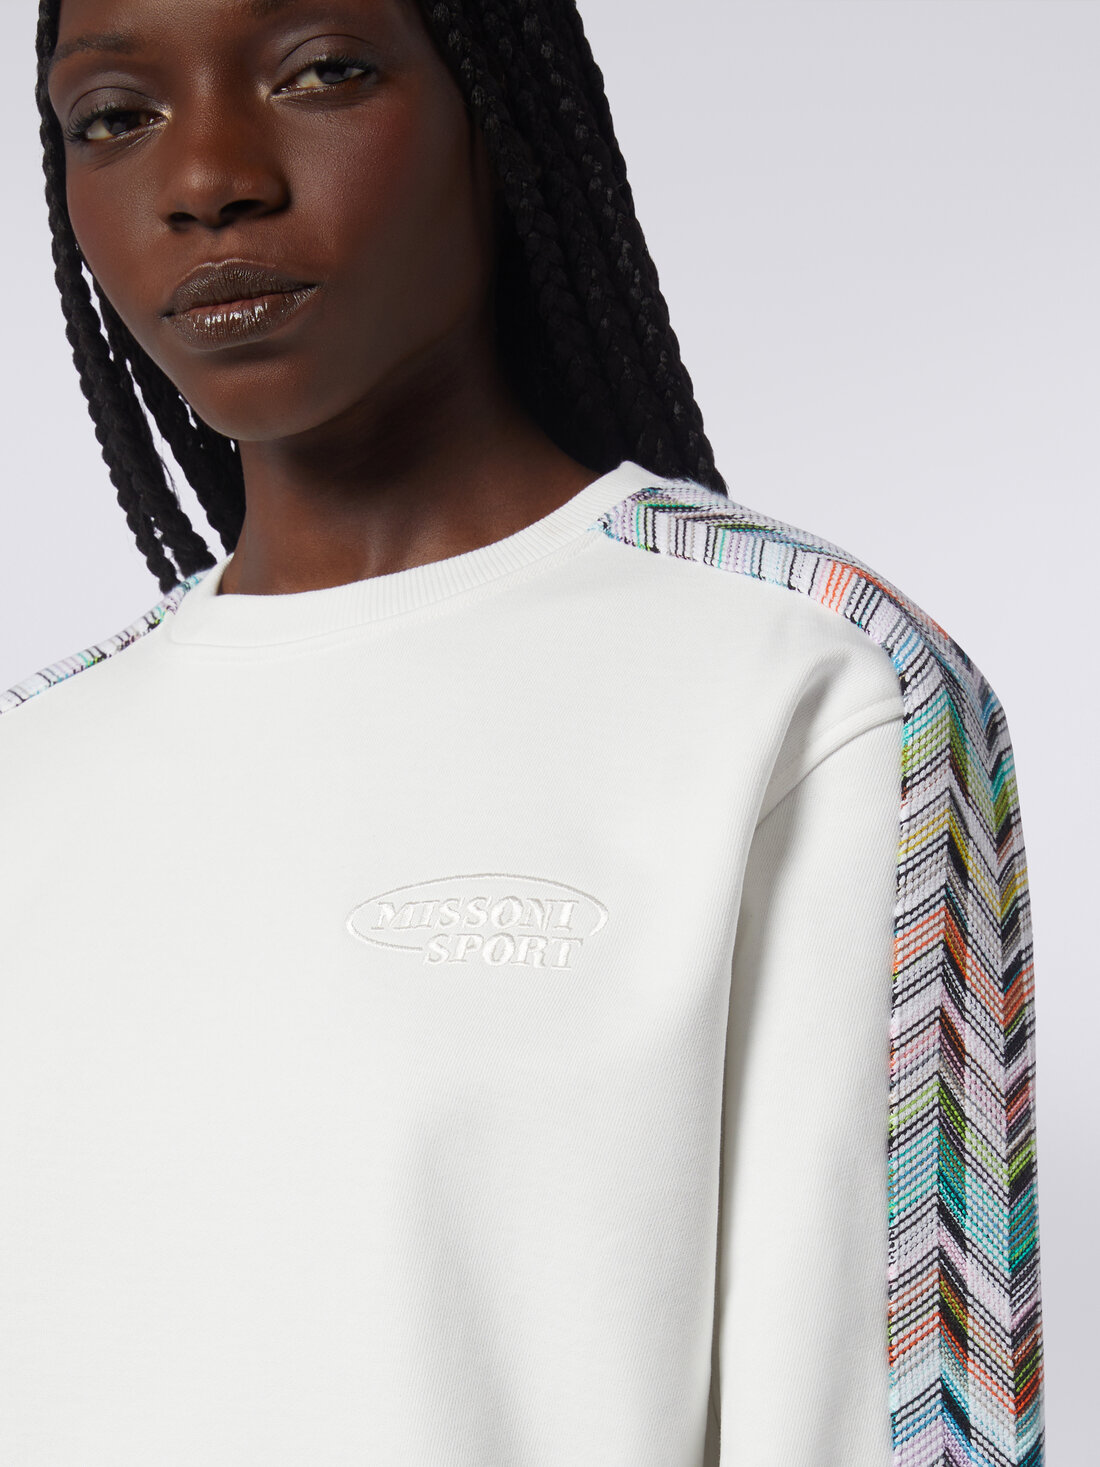 Crew-neck sweatshirt with logo and knitted details, Multicoloured  - SS24SW06BJ00JVS01BK - 4